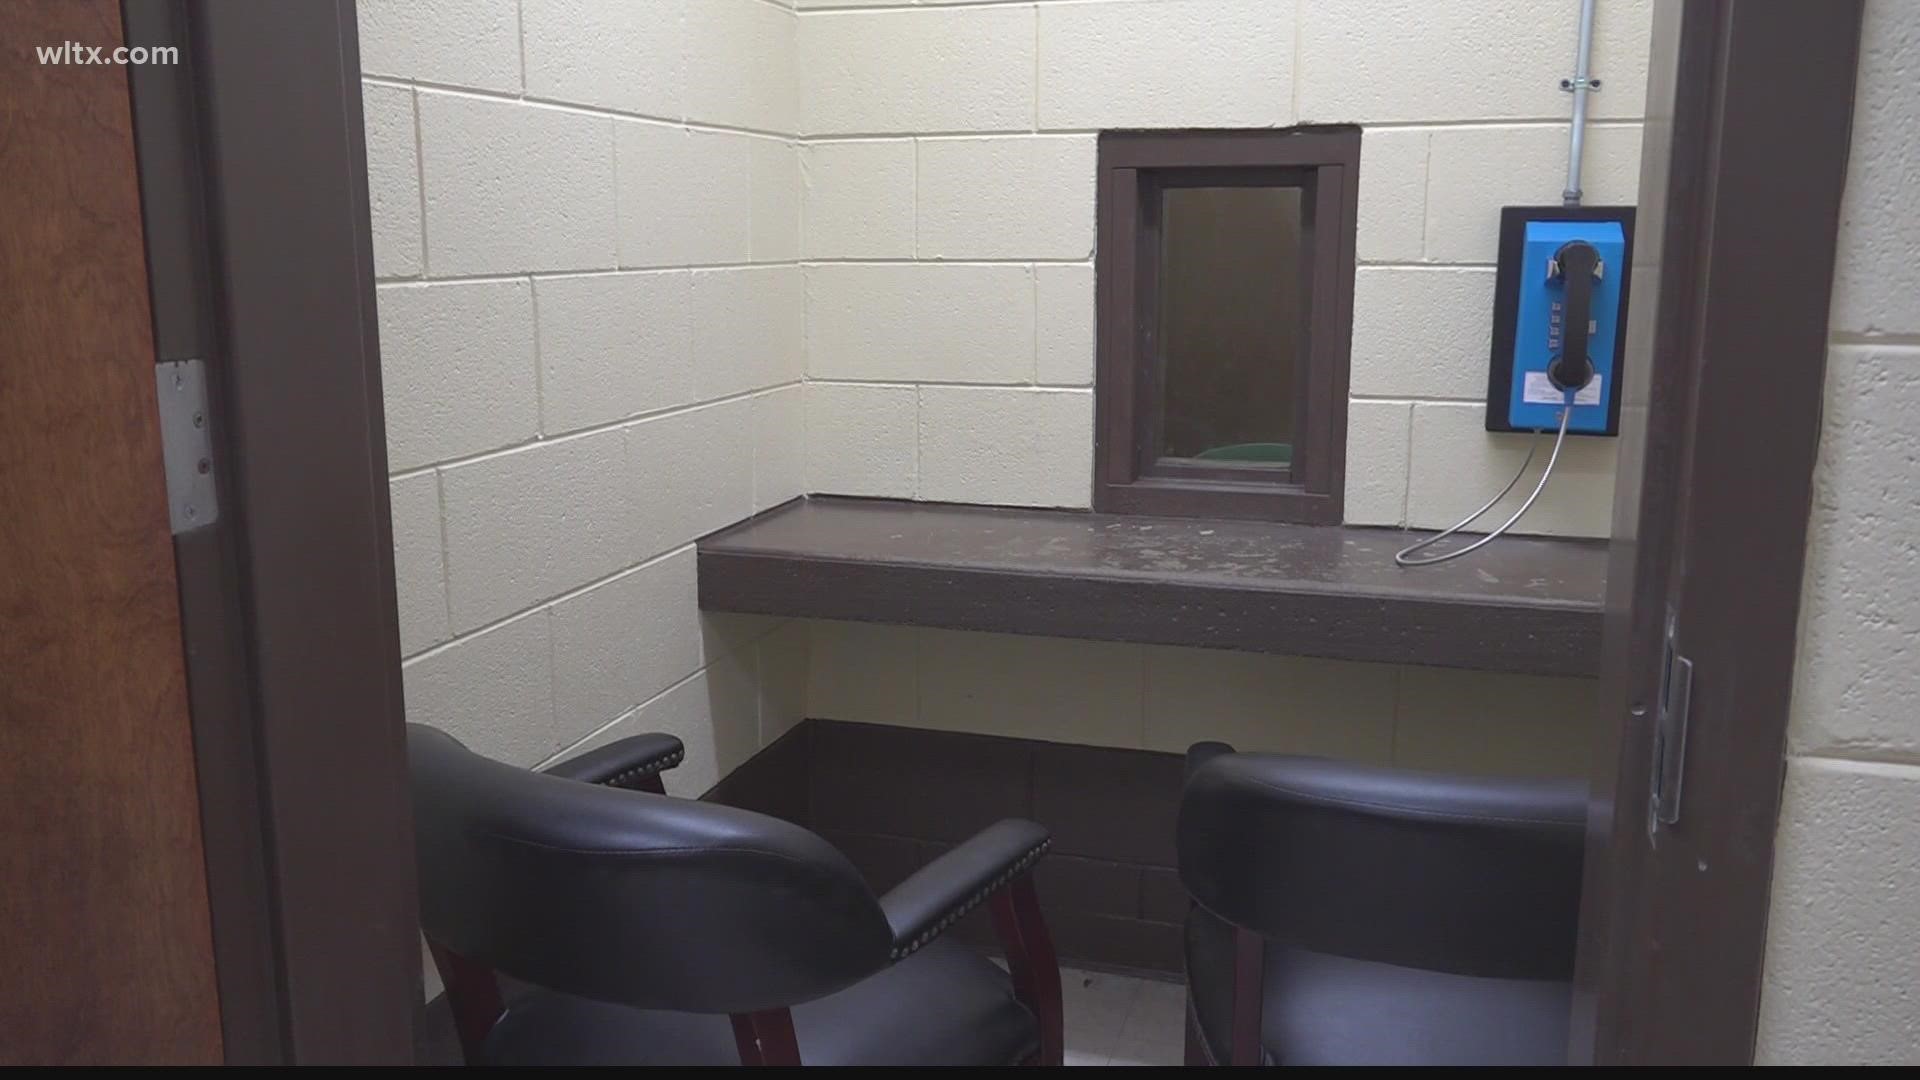 The jail has had a four month pause on visitation as the phone system in the visiting booths were being worked on.